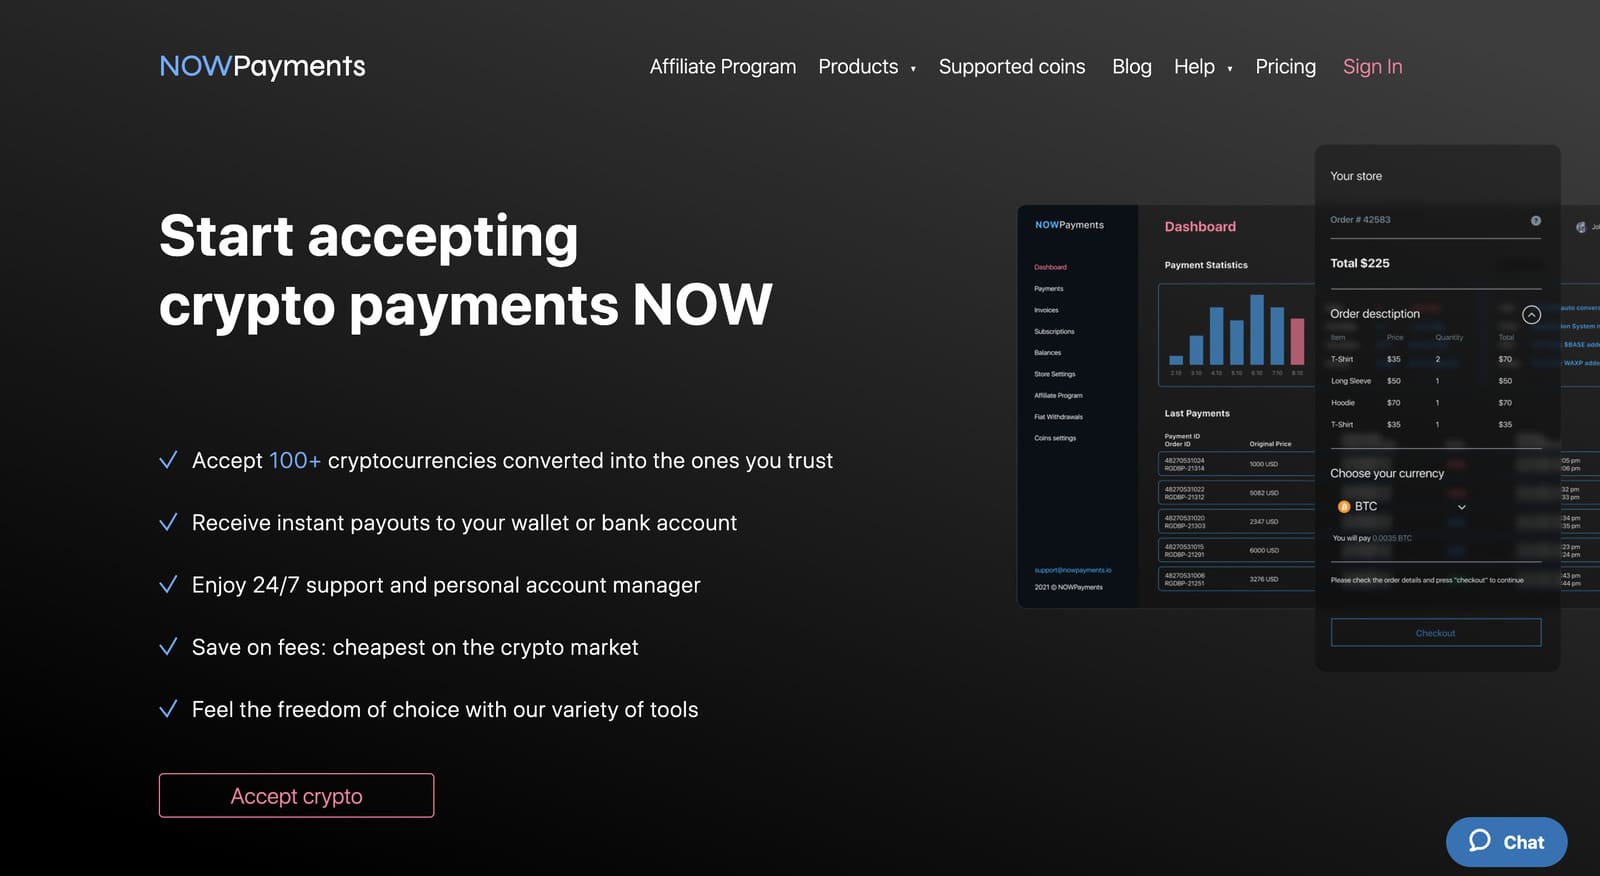 You can use NOWPayments both to accept cryptocurrency payments and to convert them into fiat.